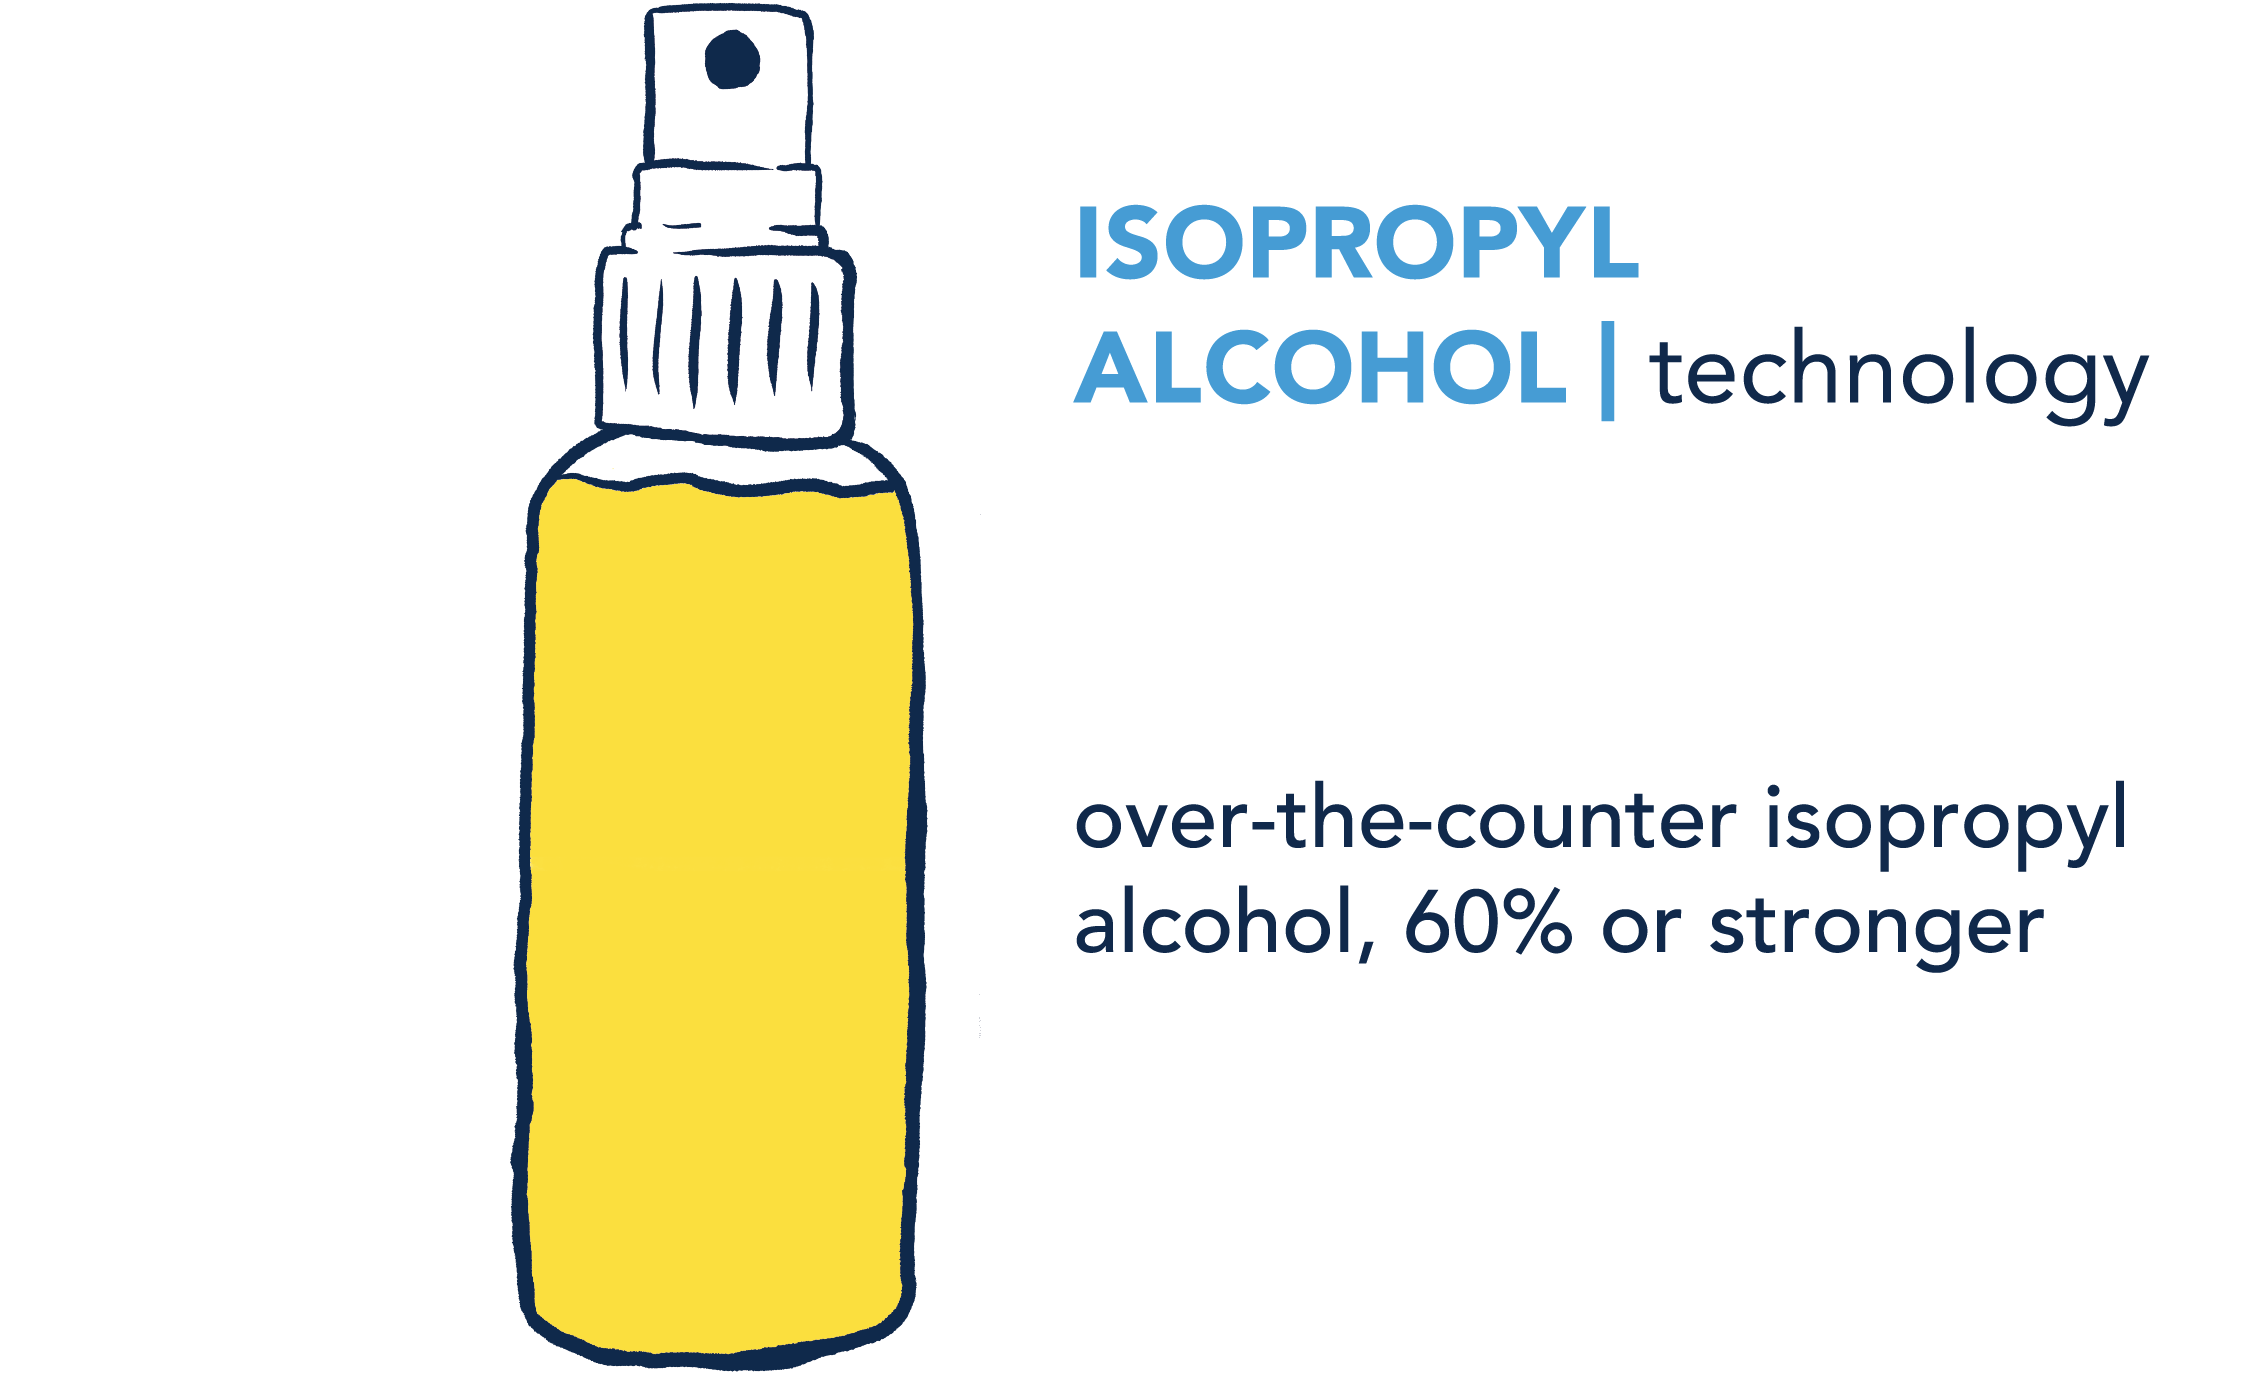 Isopropyl Alcohol: technology. over-the-counter isopropyl alcohol (60% or stronger).